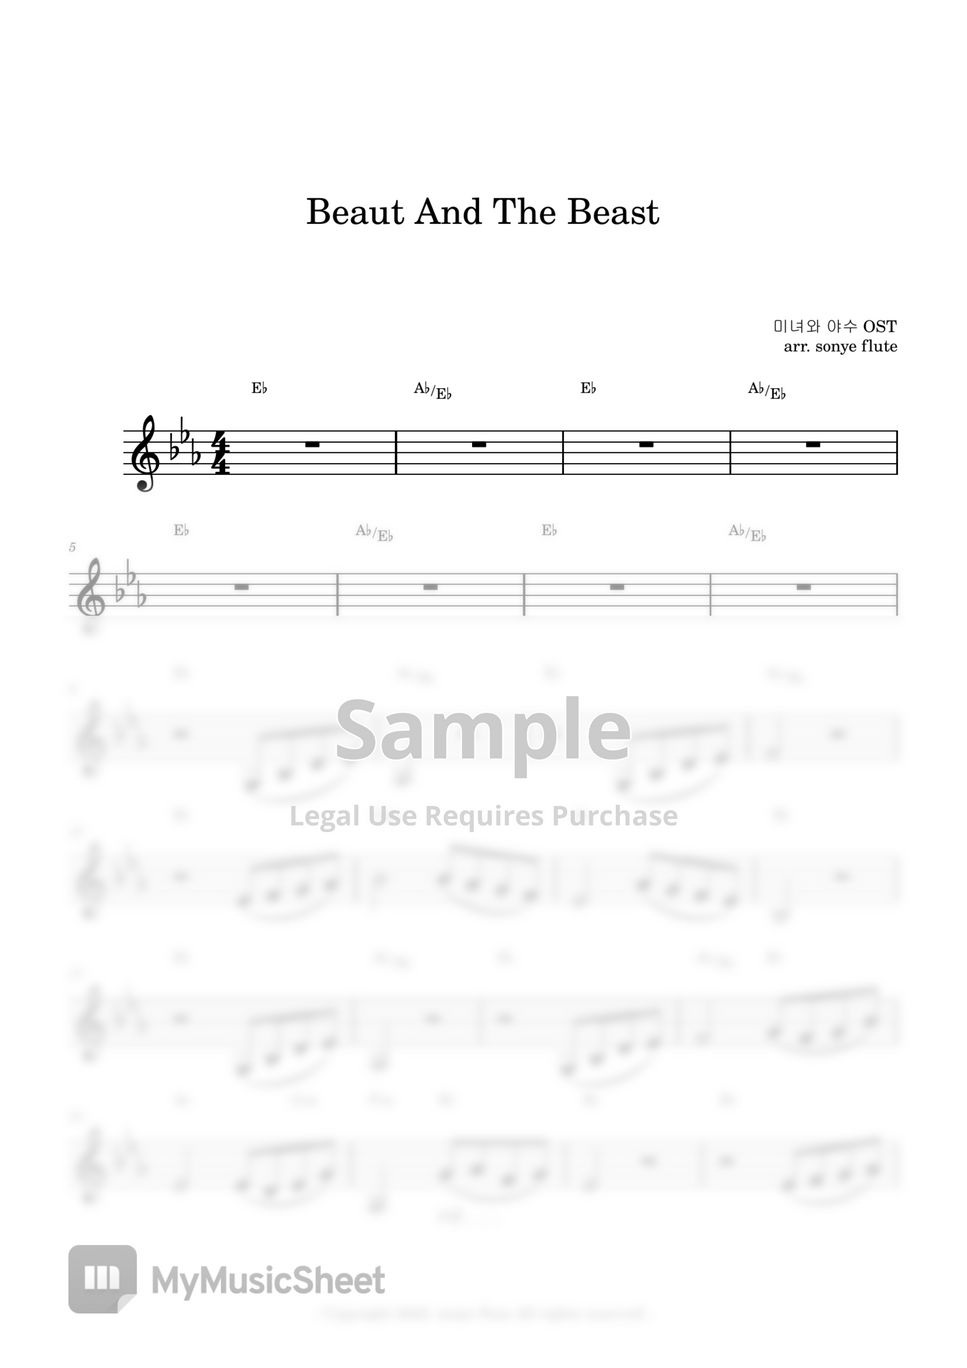 disney-beauty-and-the-beast-ost-beauty-and-the-beast-flute-sheet